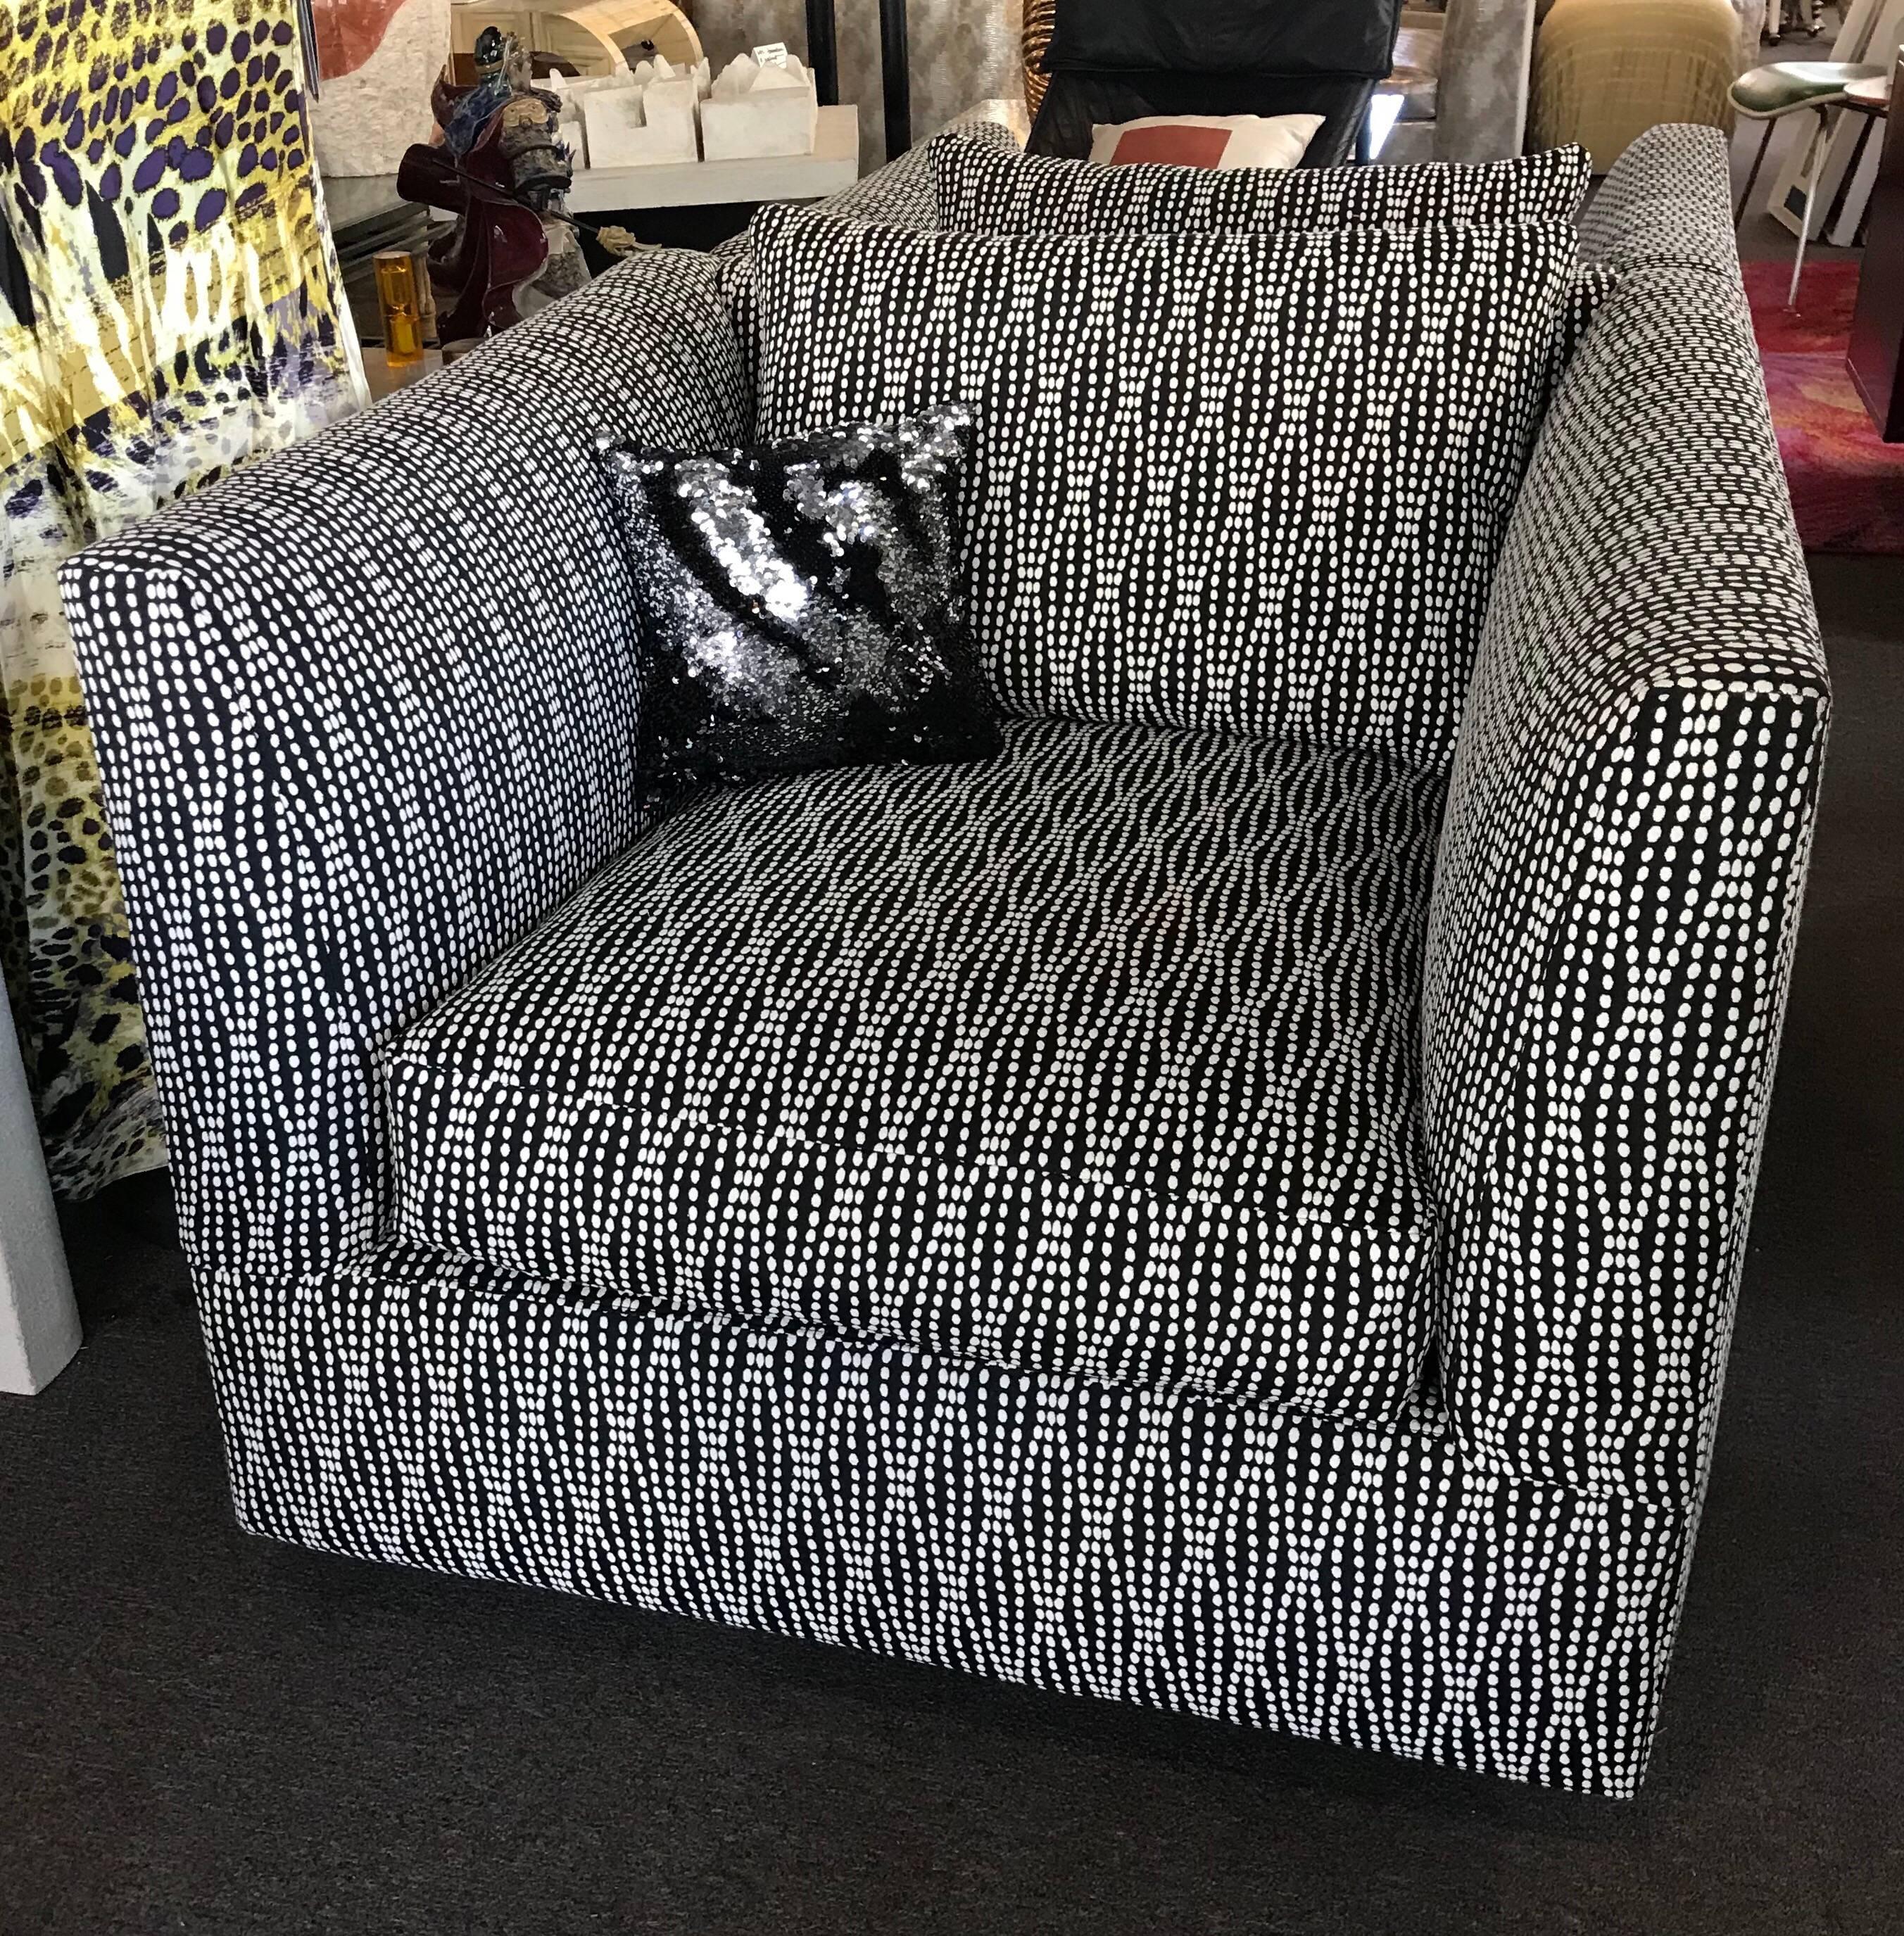 The size and shape of these vintage club chairs is very cool and are very sexy! They have been newly reupholstered in a modern art style black and white jacquard fabric. Loose back cushion and reversible loose seat. Modern and very modern chic!